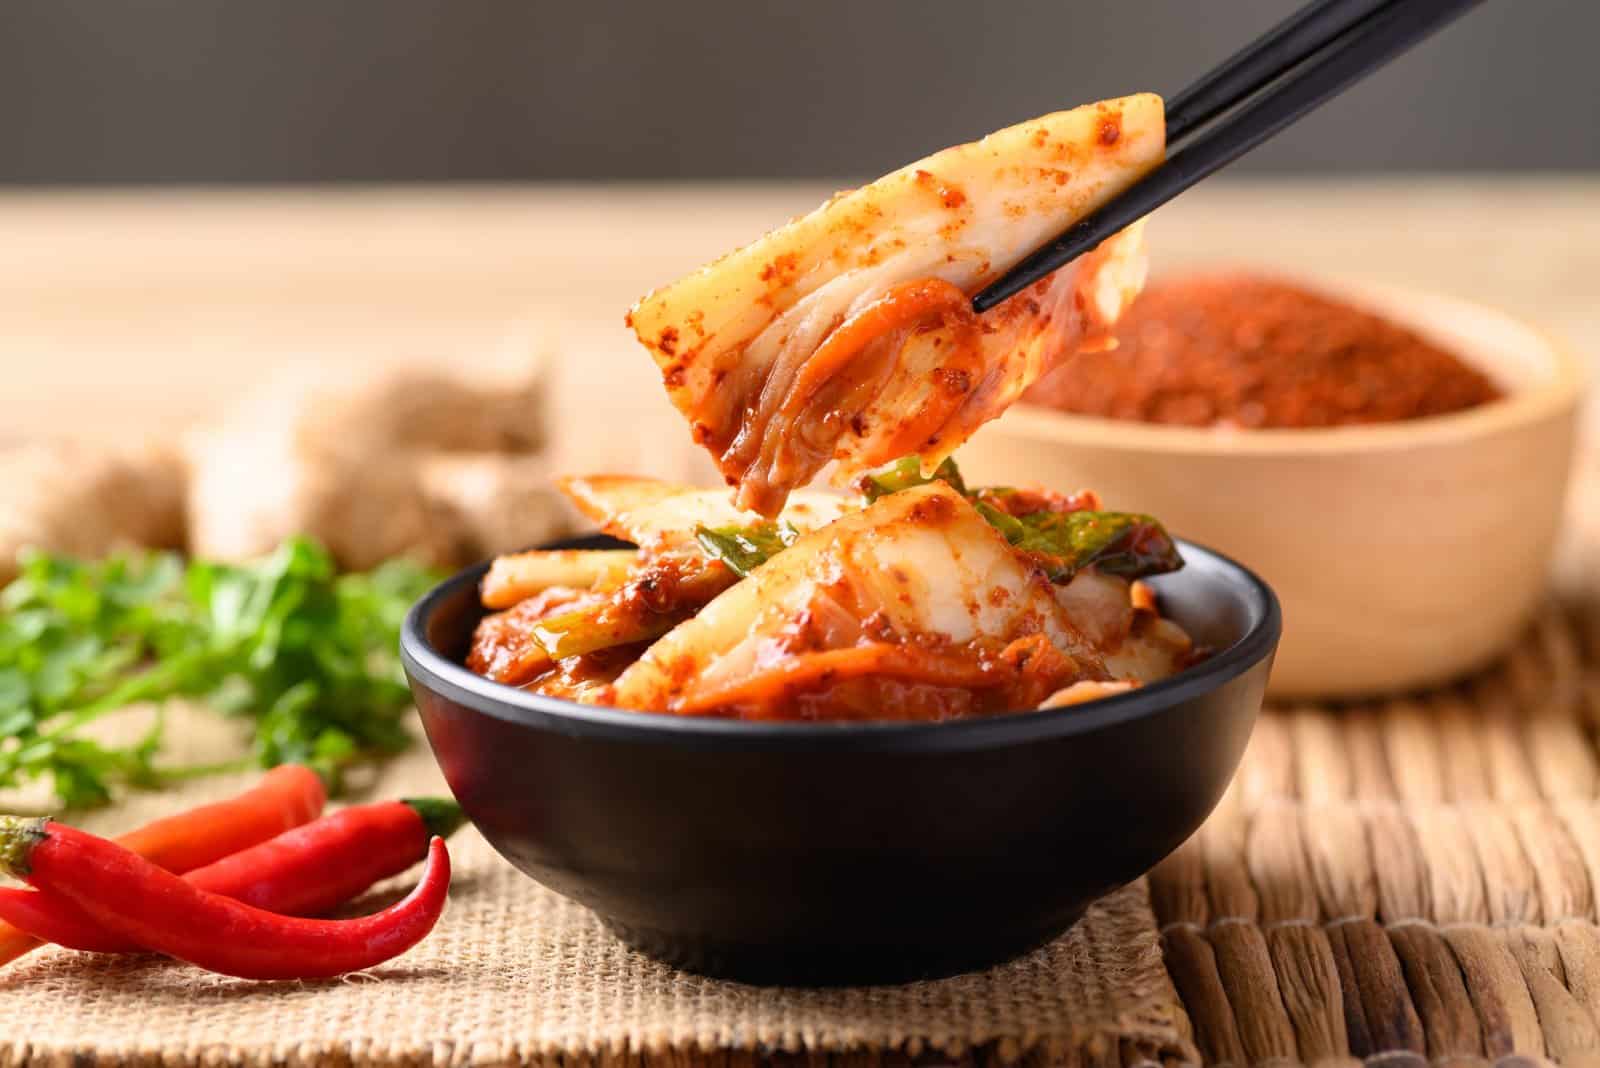 Image Credit: Shutterstock / Nungning20 <p>A staple in Korean cuisine, this fermented vegetable dish is both spicy and sour, packed with flavor and health benefits.</p>